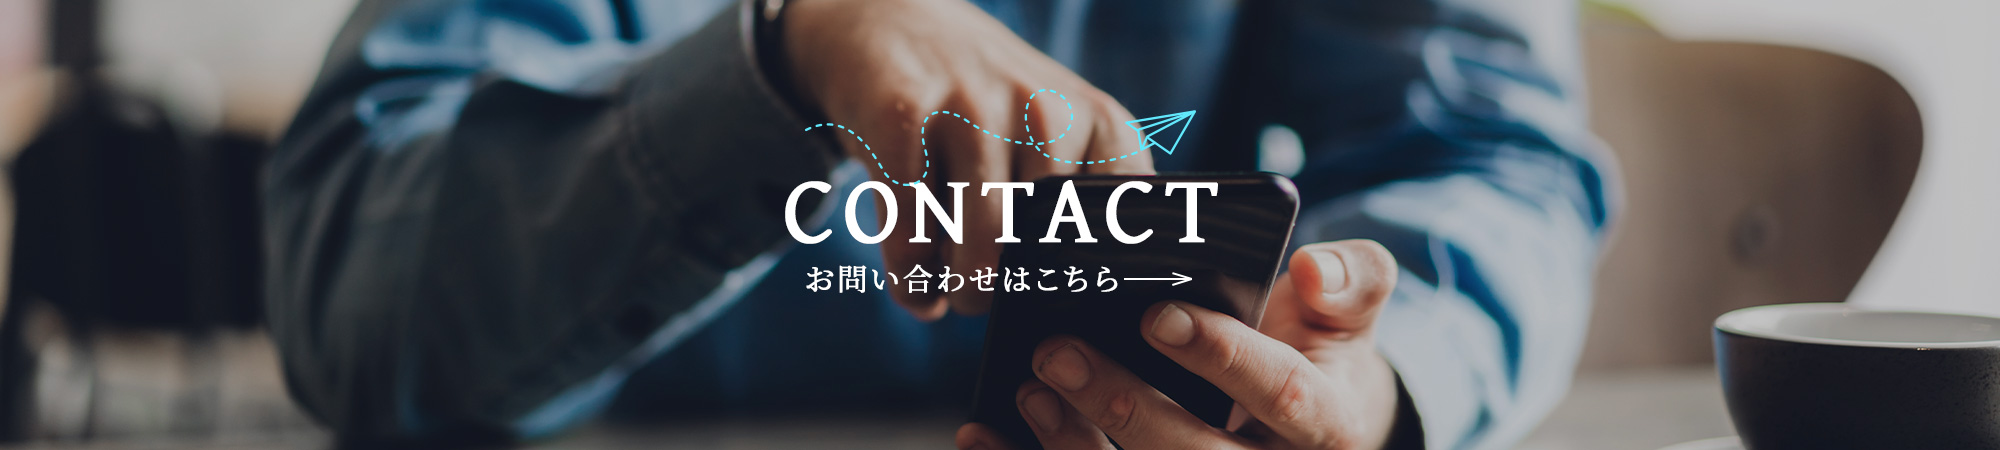 pc_contact